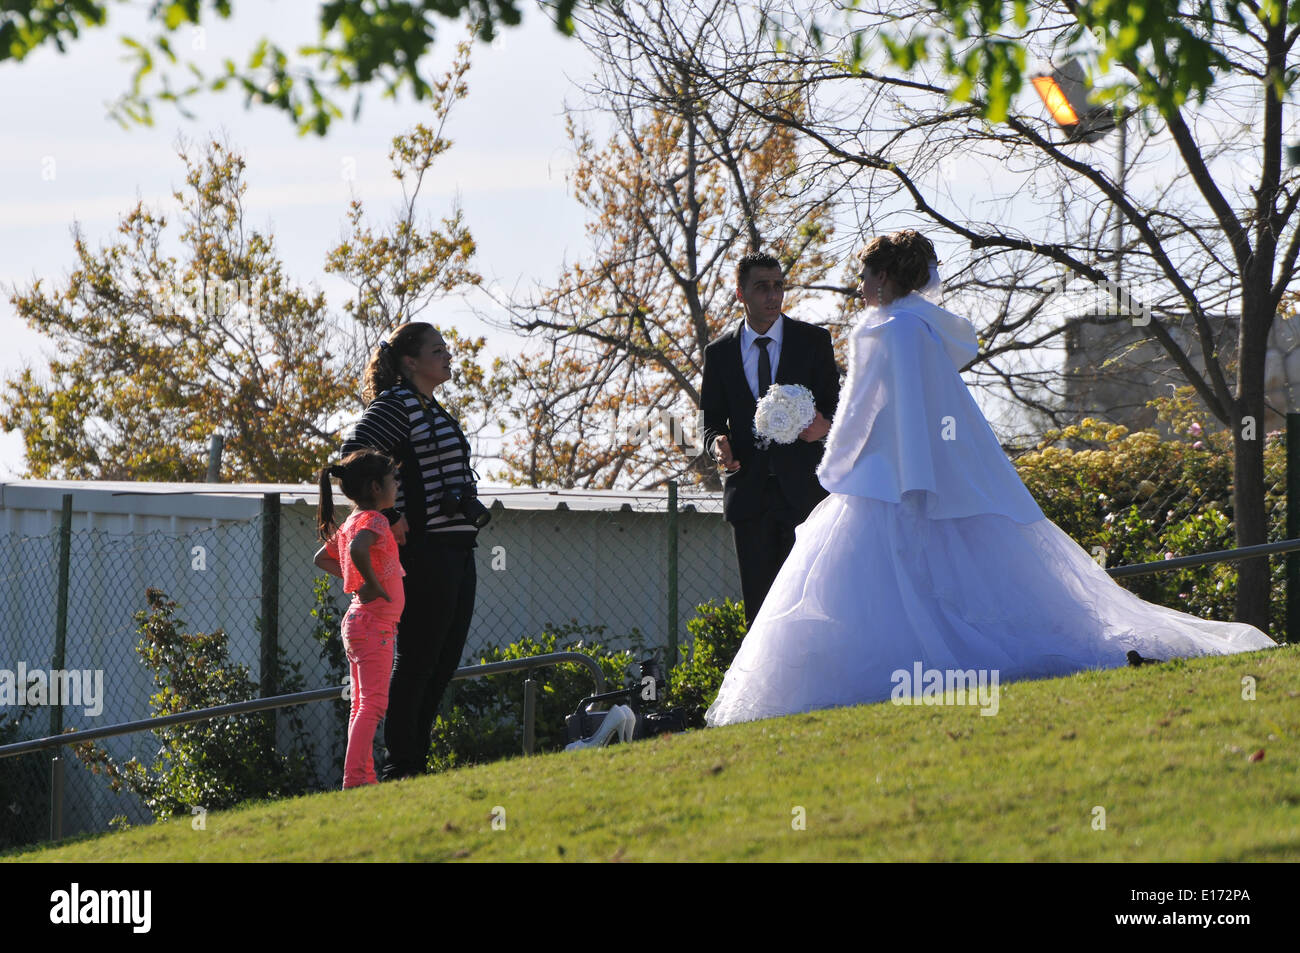 Arab Bride and groom having their wedding pictures taken at the Wohl Rose Park of Jerusalem Stock Photo